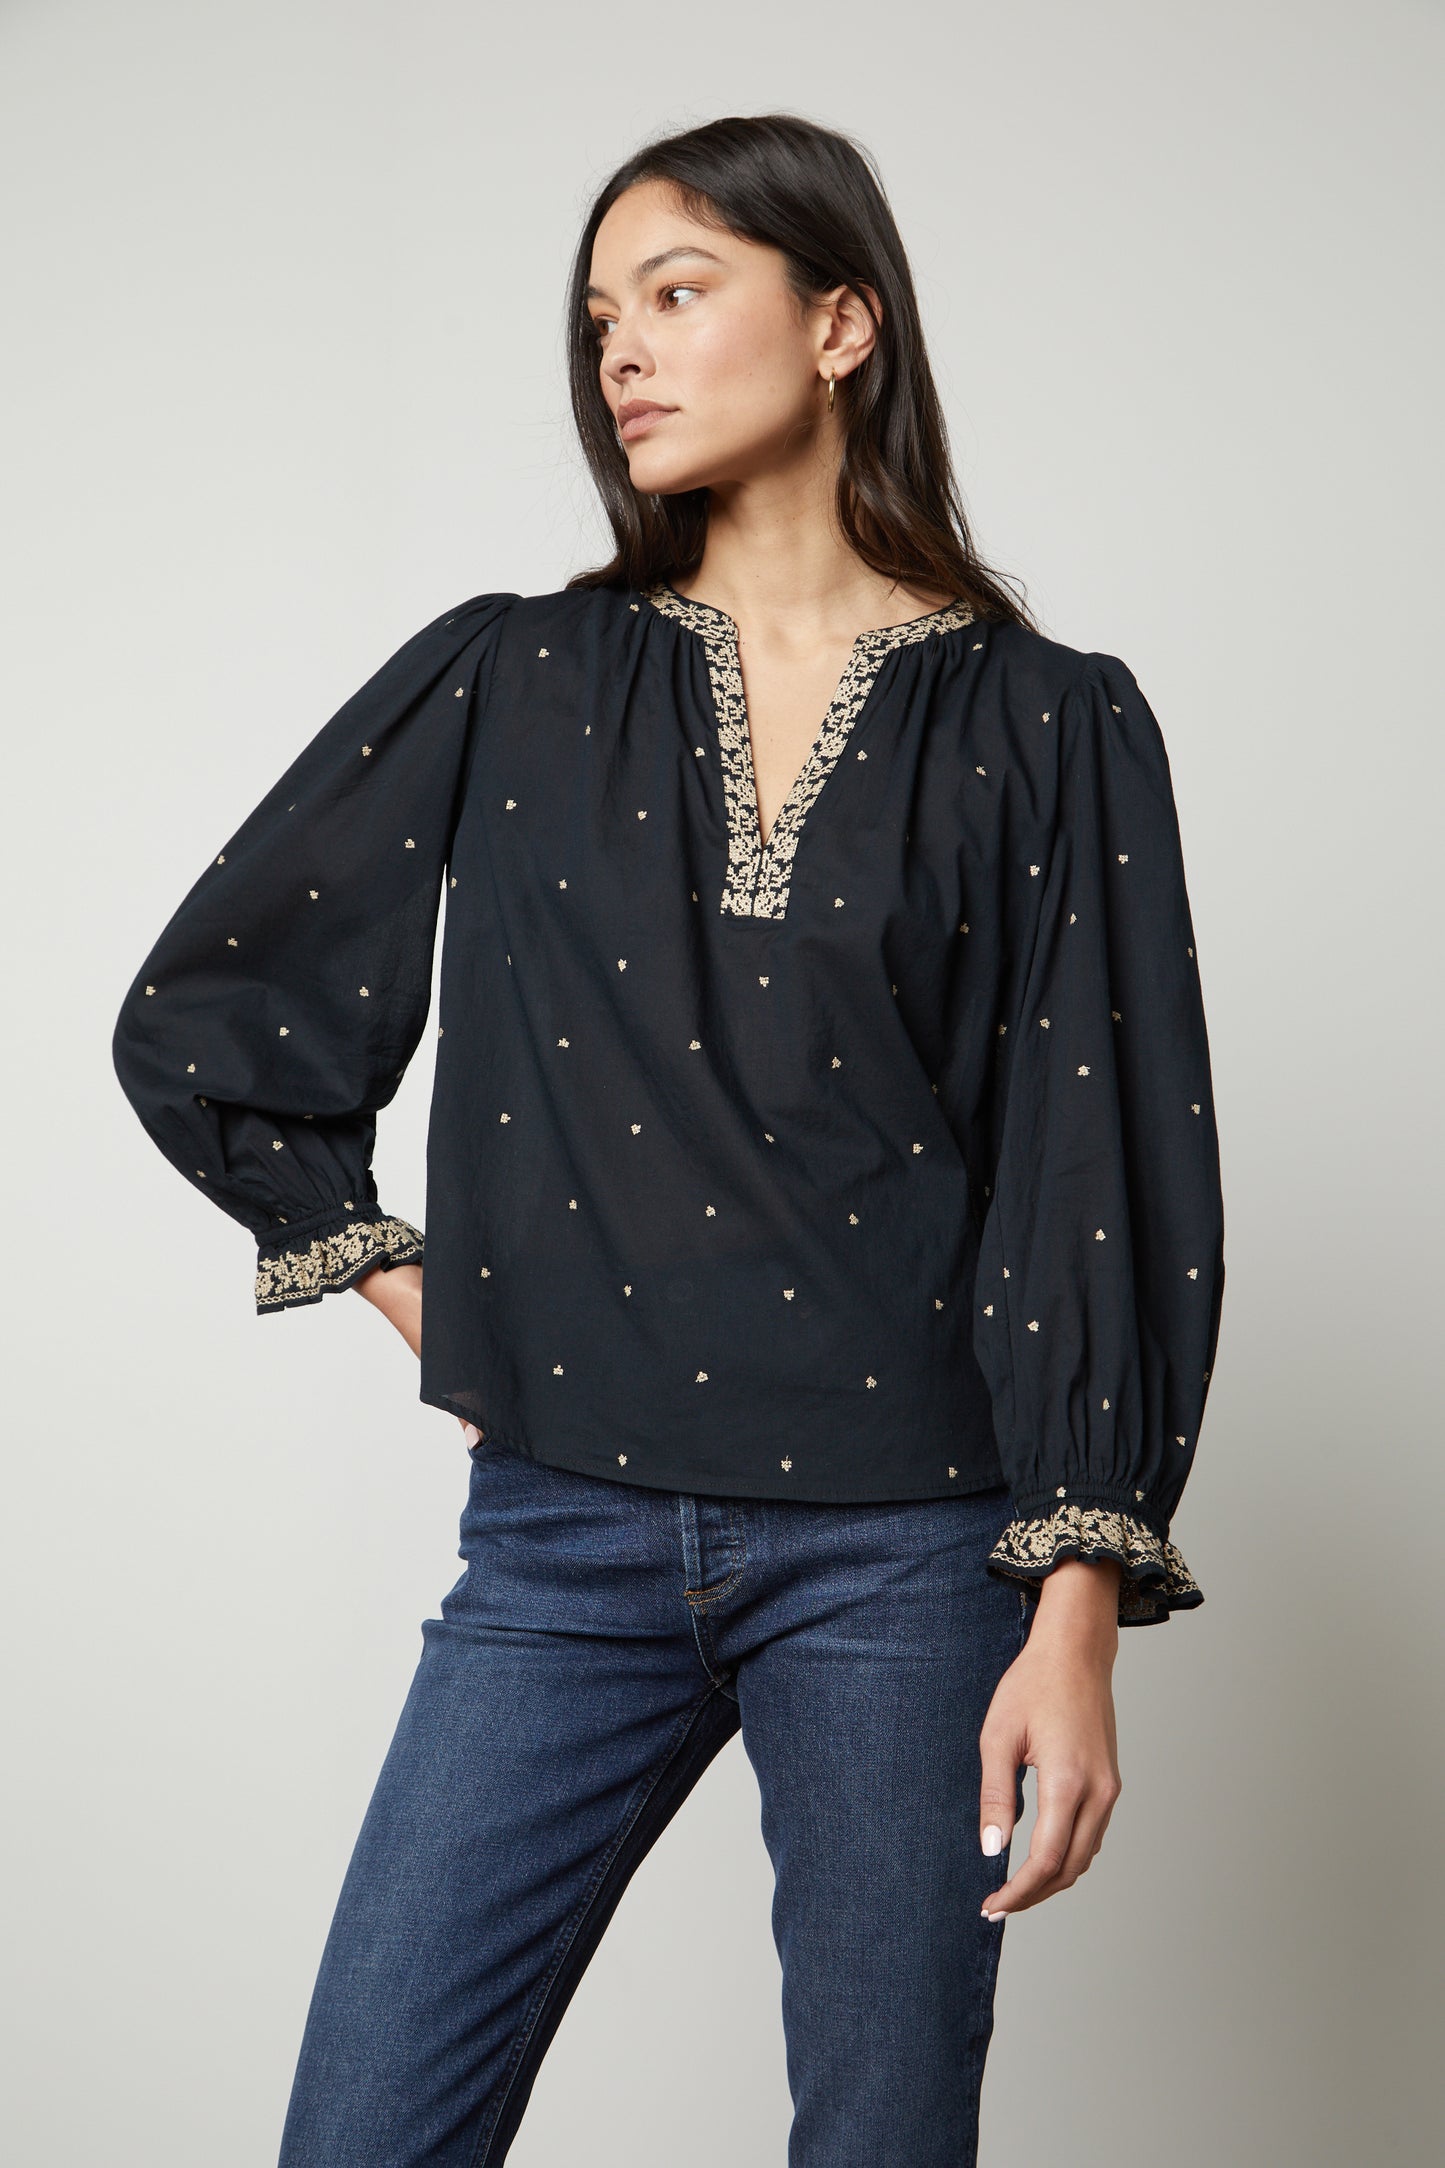 ANIA TOP IN BLACK